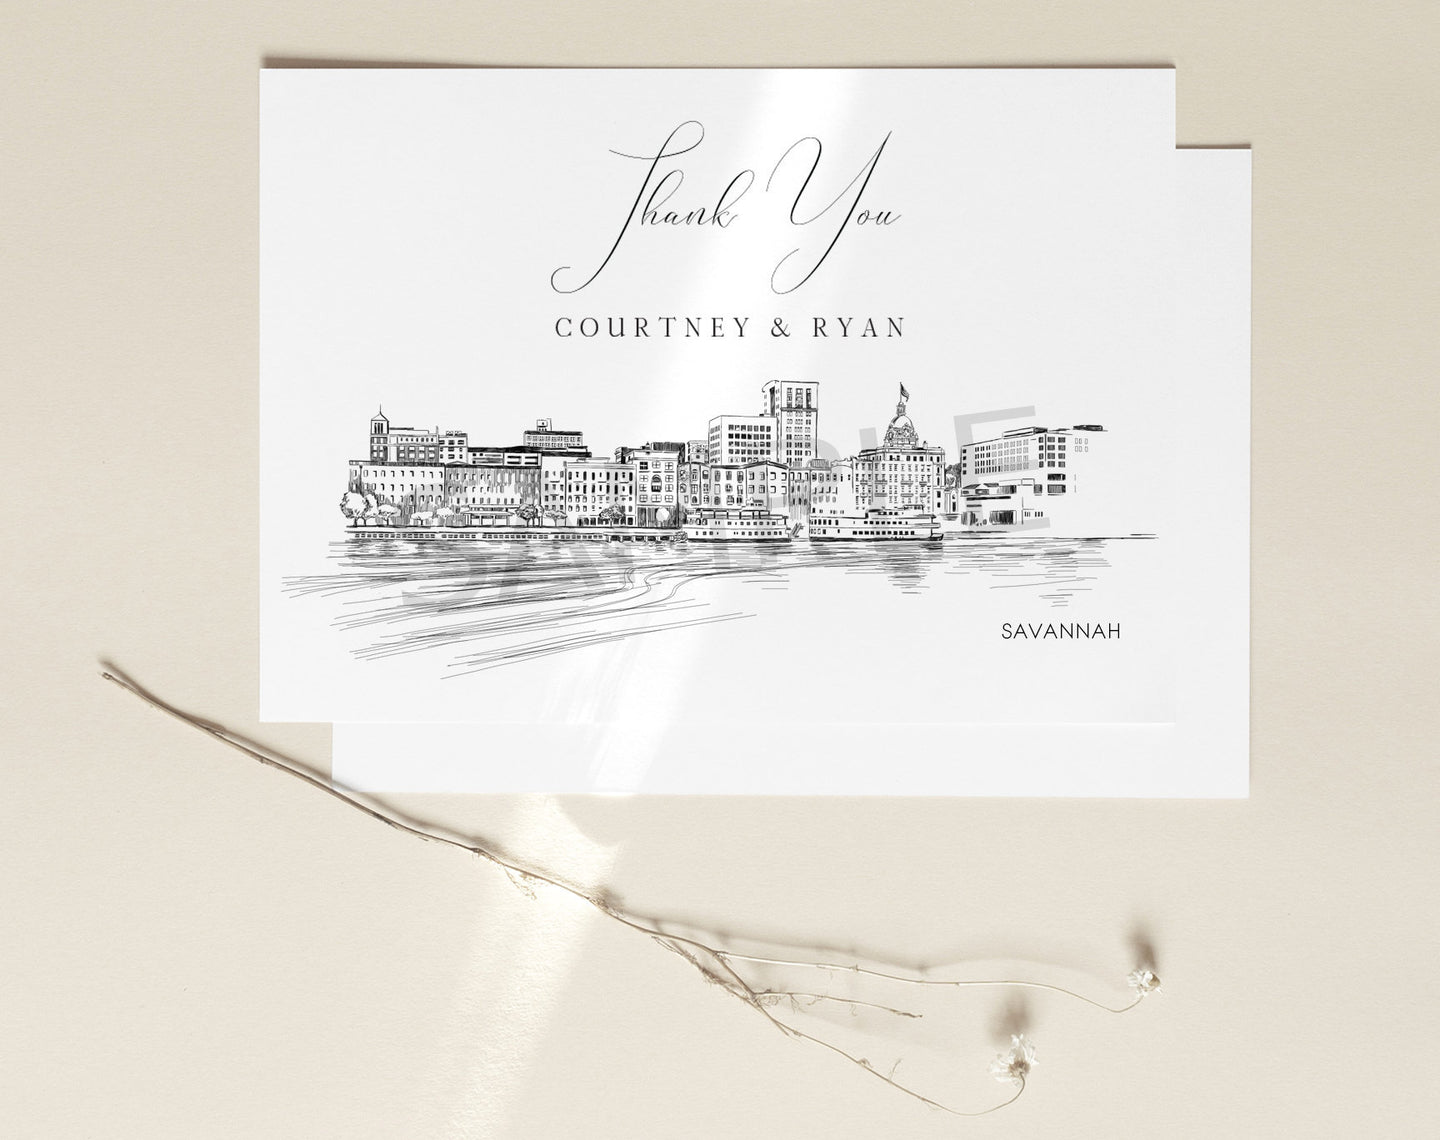 Savannah, GA Skyline Thank You Cards, Personal Note Cards, Bridal Shower, Real Estate Agent, Corporate Thank you Cards (set of 25 cards)